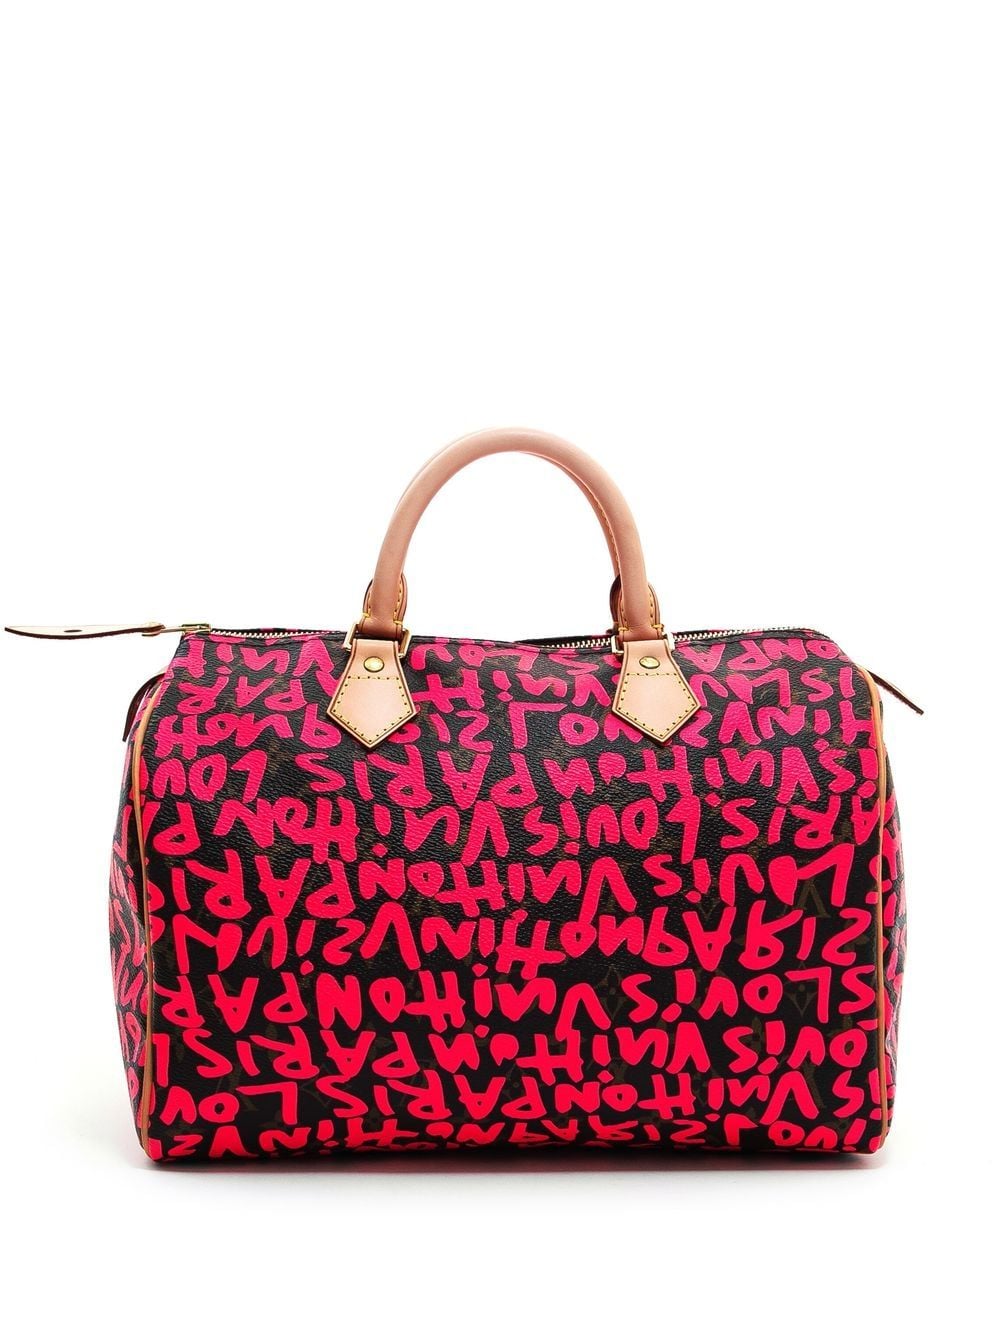 Louis Vuitton Pre-Owned 2018-2019 pre-owned Graffiti Speedy 30 handbag - Pink von Louis Vuitton Pre-Owned